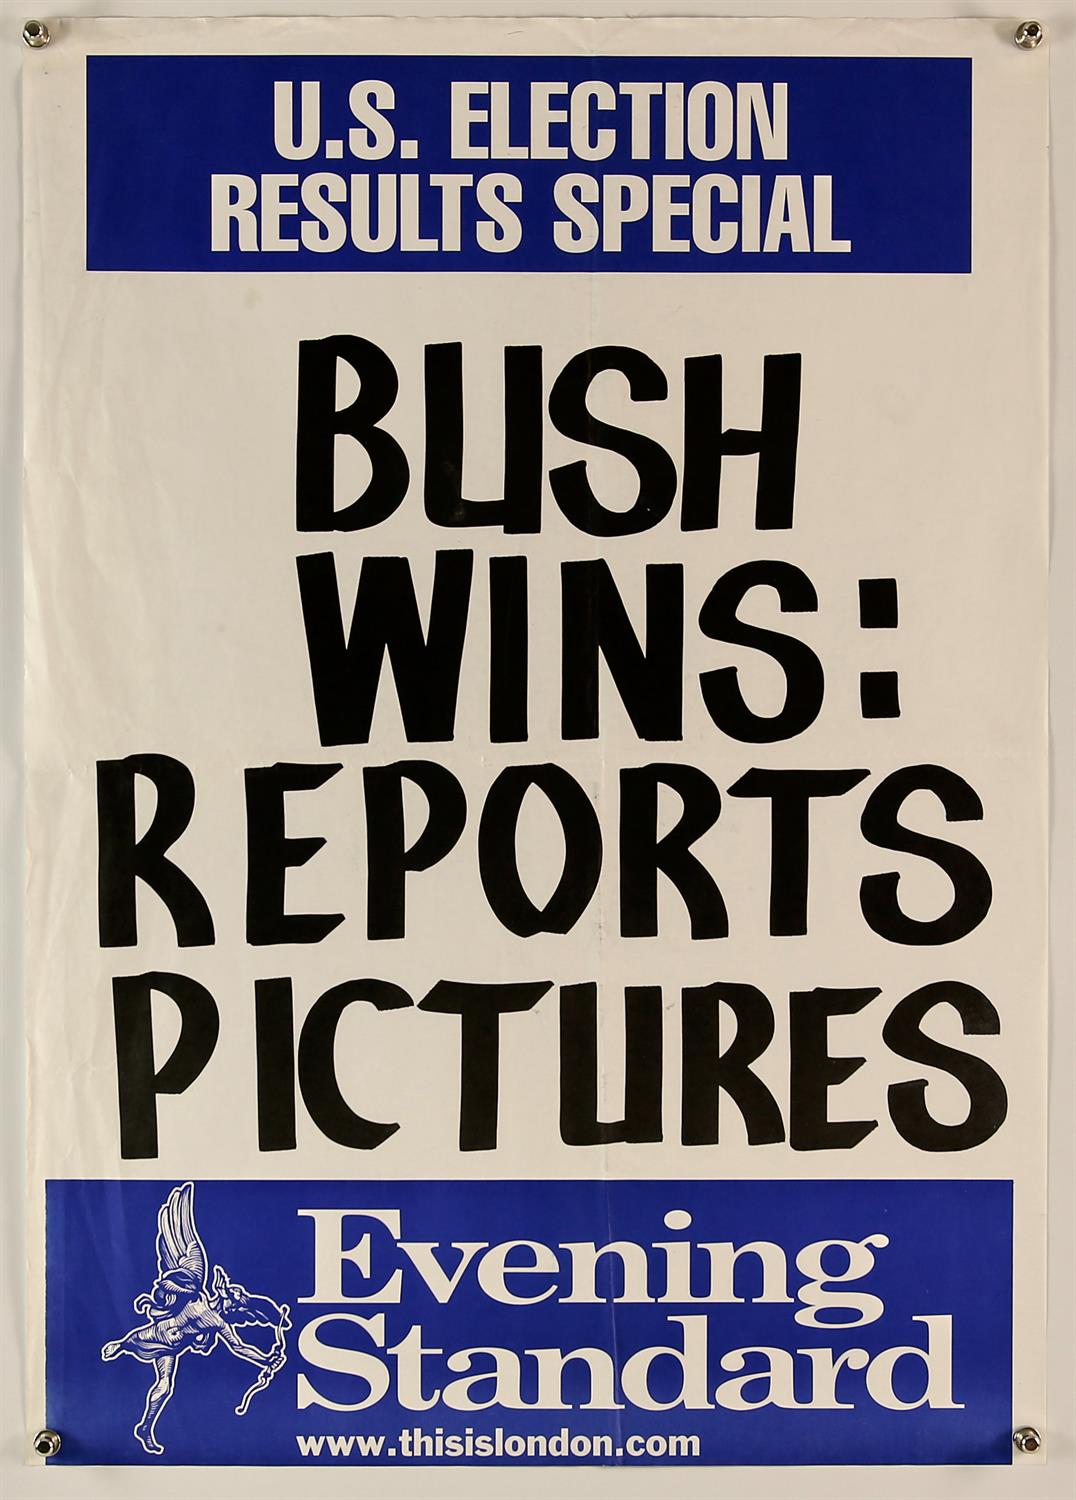 Evening Standard News Headline sheet (2000) US Election Result Bush Wins, 25 by 17.5 inches approx,